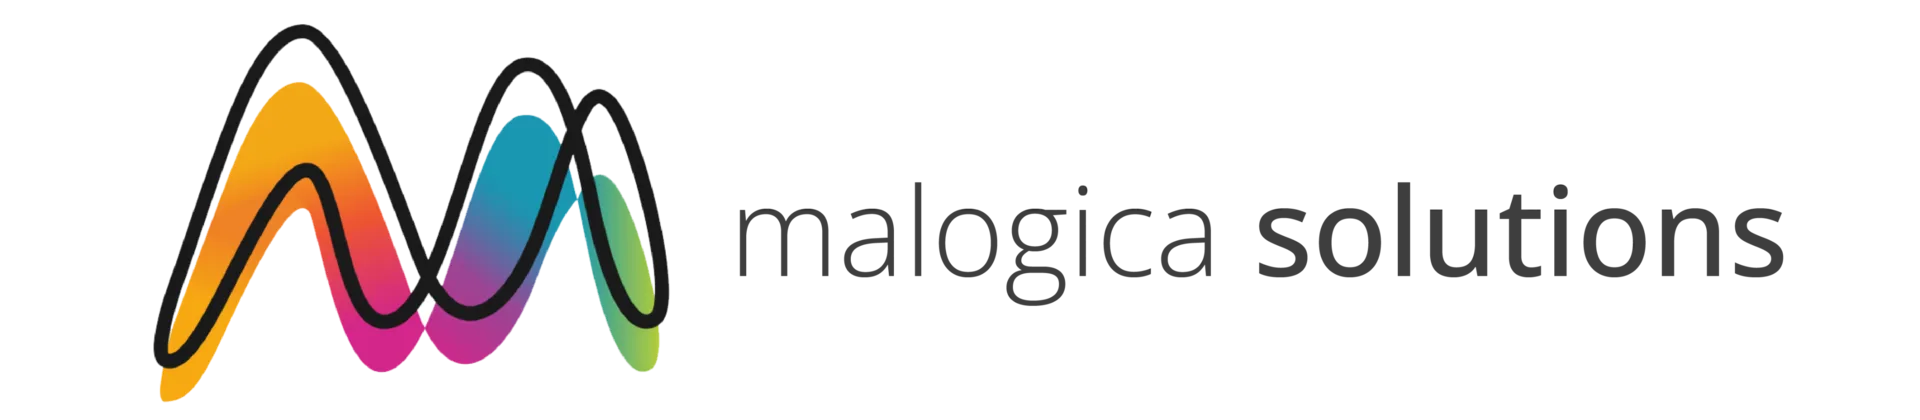 Malogica Systems